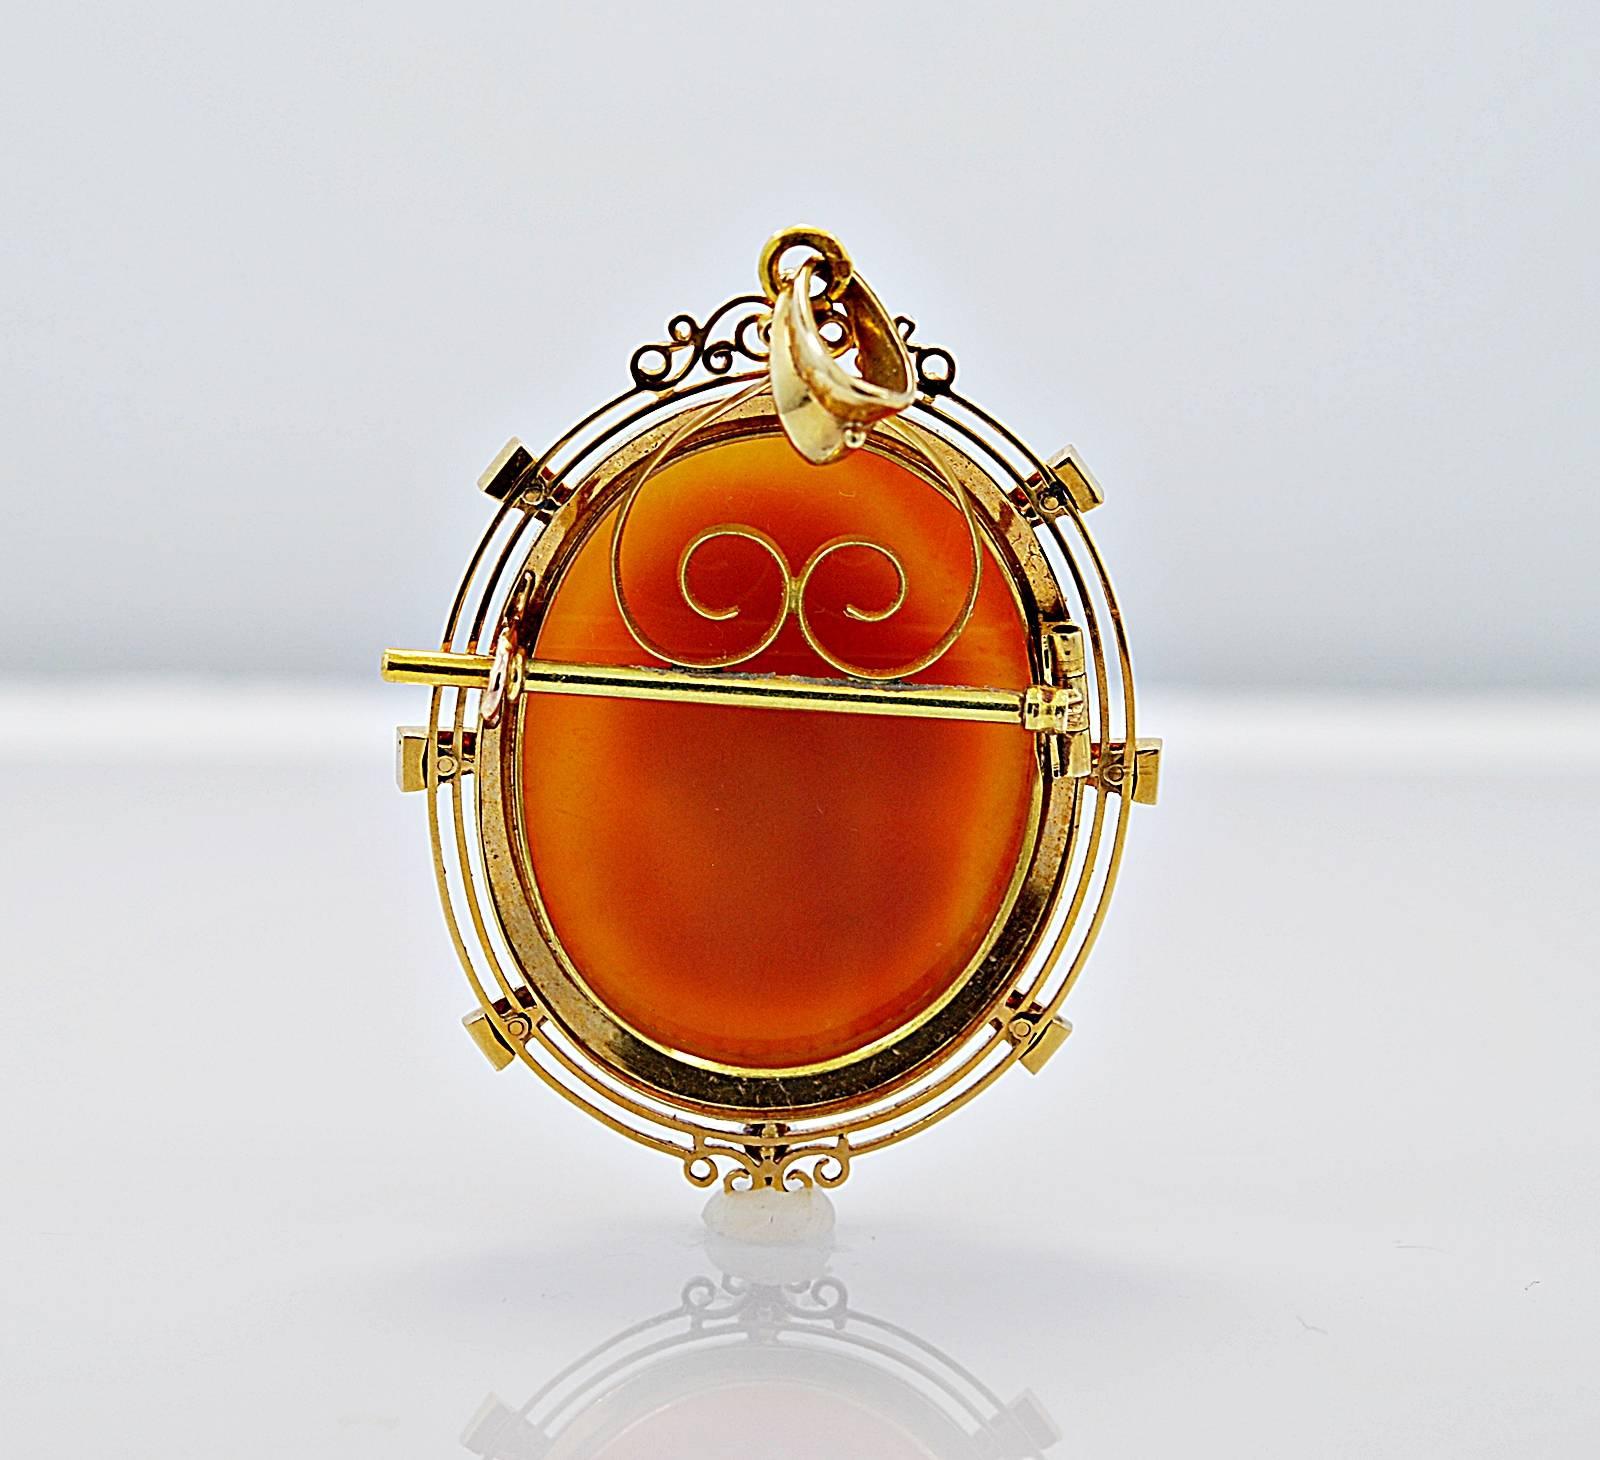 Edwardian Sardonyx Hard Stone Cameo Gold Brooch In Excellent Condition For Sale In Tampa, FL